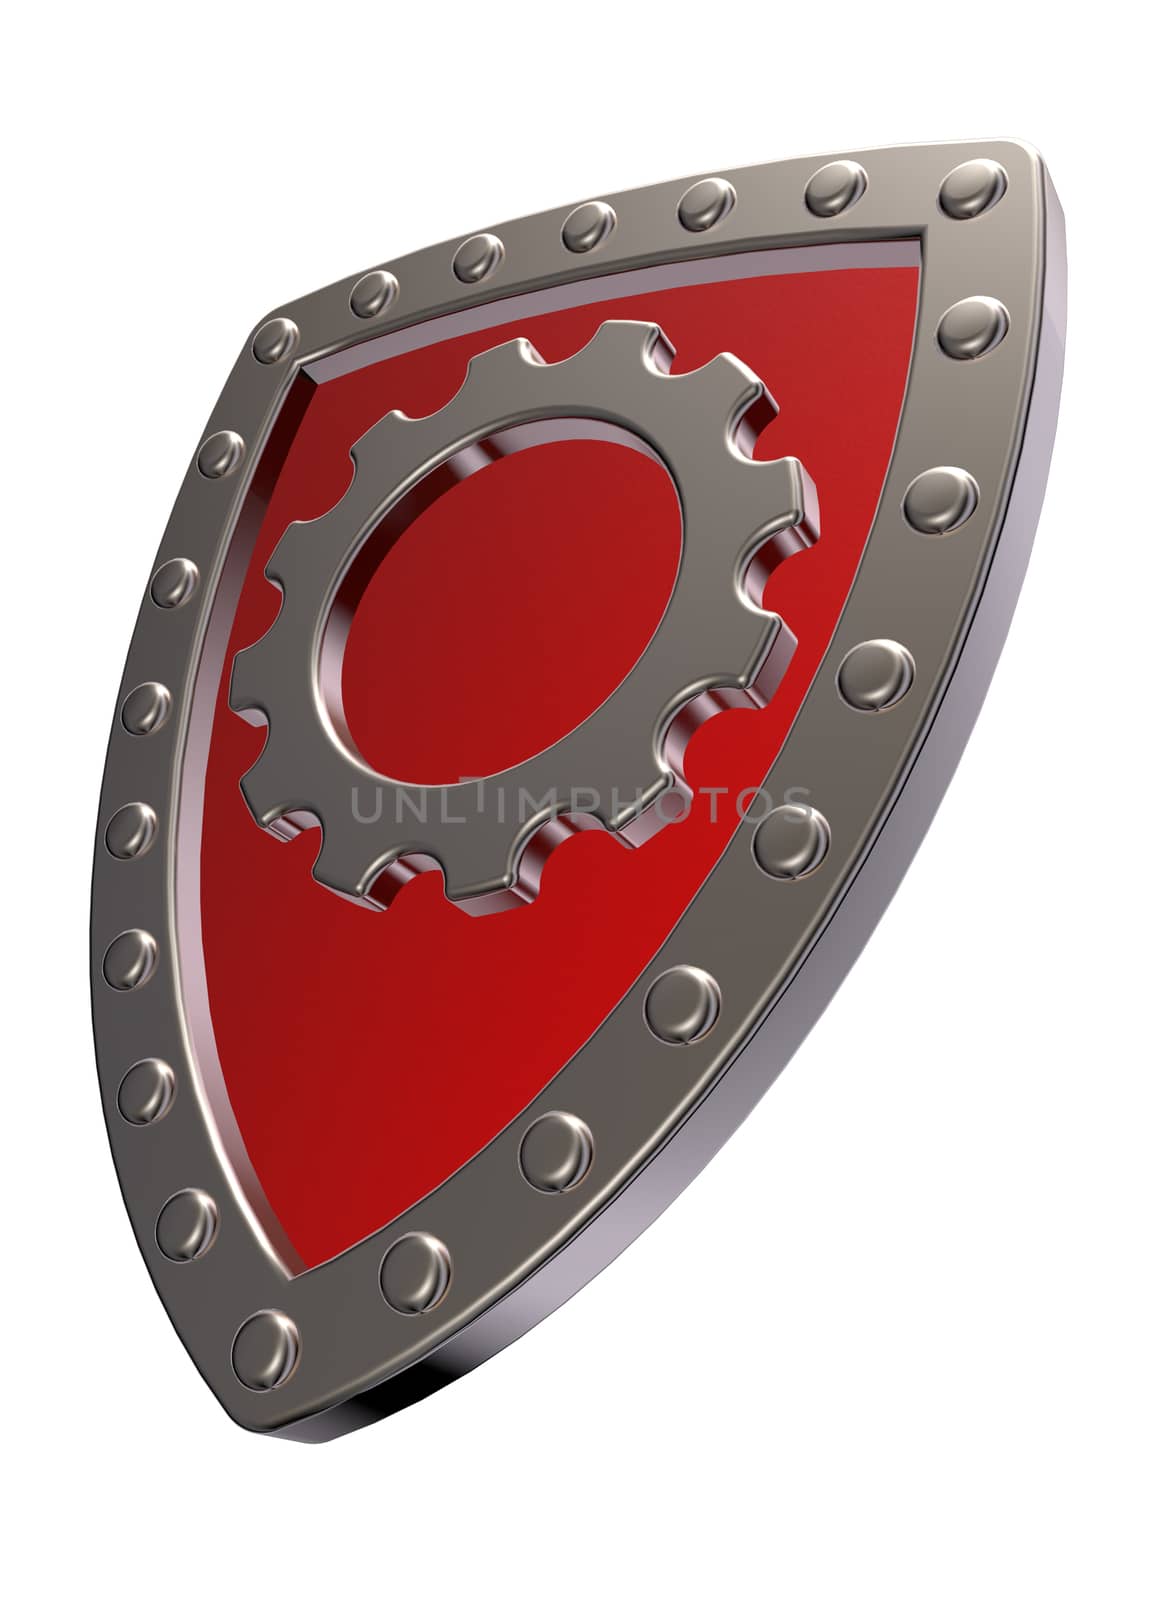 riveted metal shield with gear wheel symbol on white background - 3d illustration